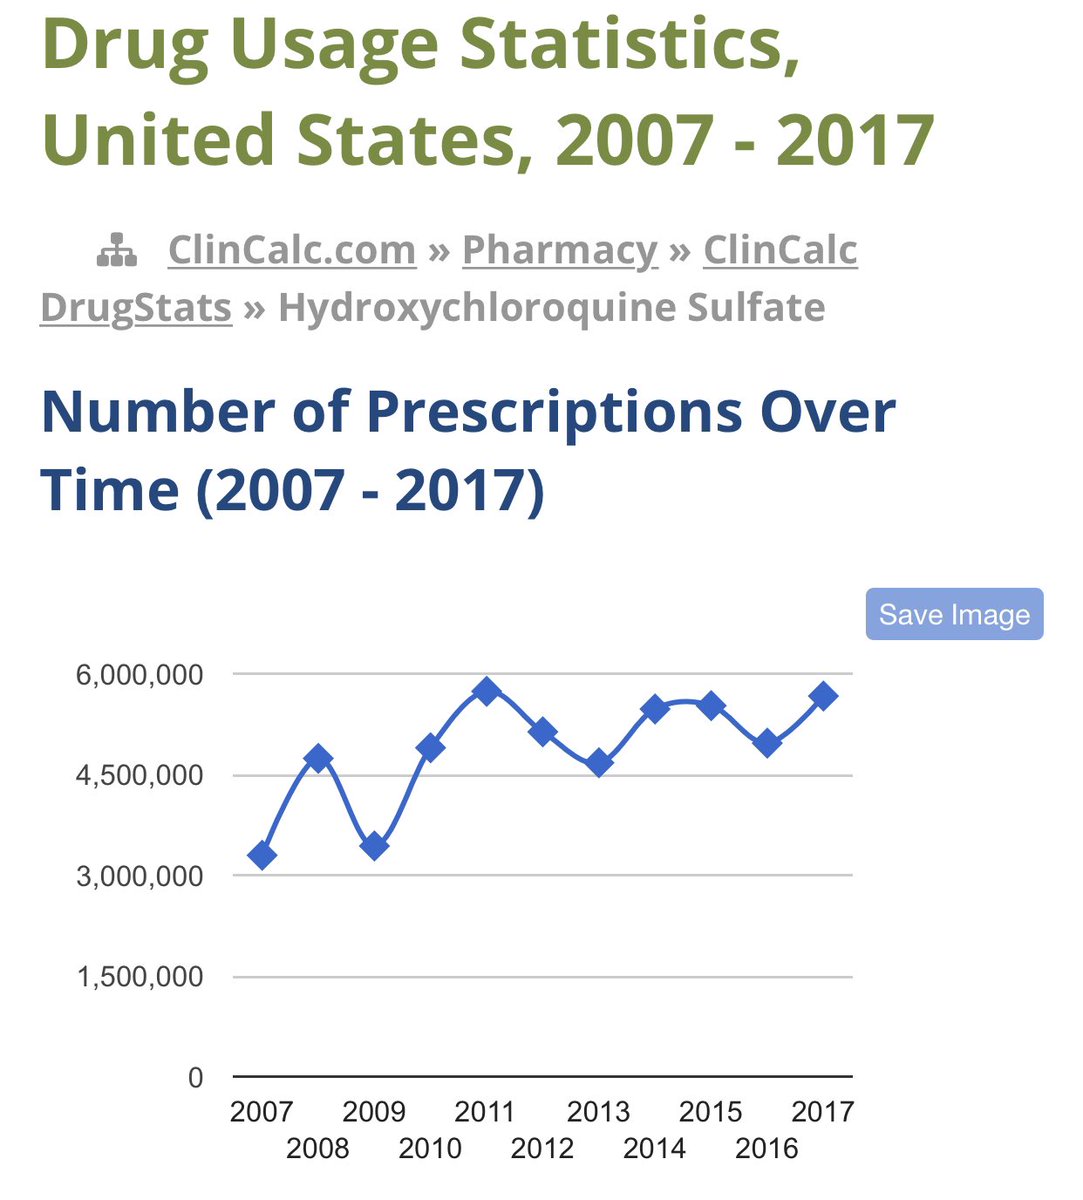 As for hydroxychloroquine, almost 50 MILLION prescriptions were filled from 2007 to 2017.According to the FDA’s Adverse Reporting System (FAERS), there were only 61 adverse reports of QT prolongation.61 adverse reports about prolonged QT out of 50 million prescriptions.